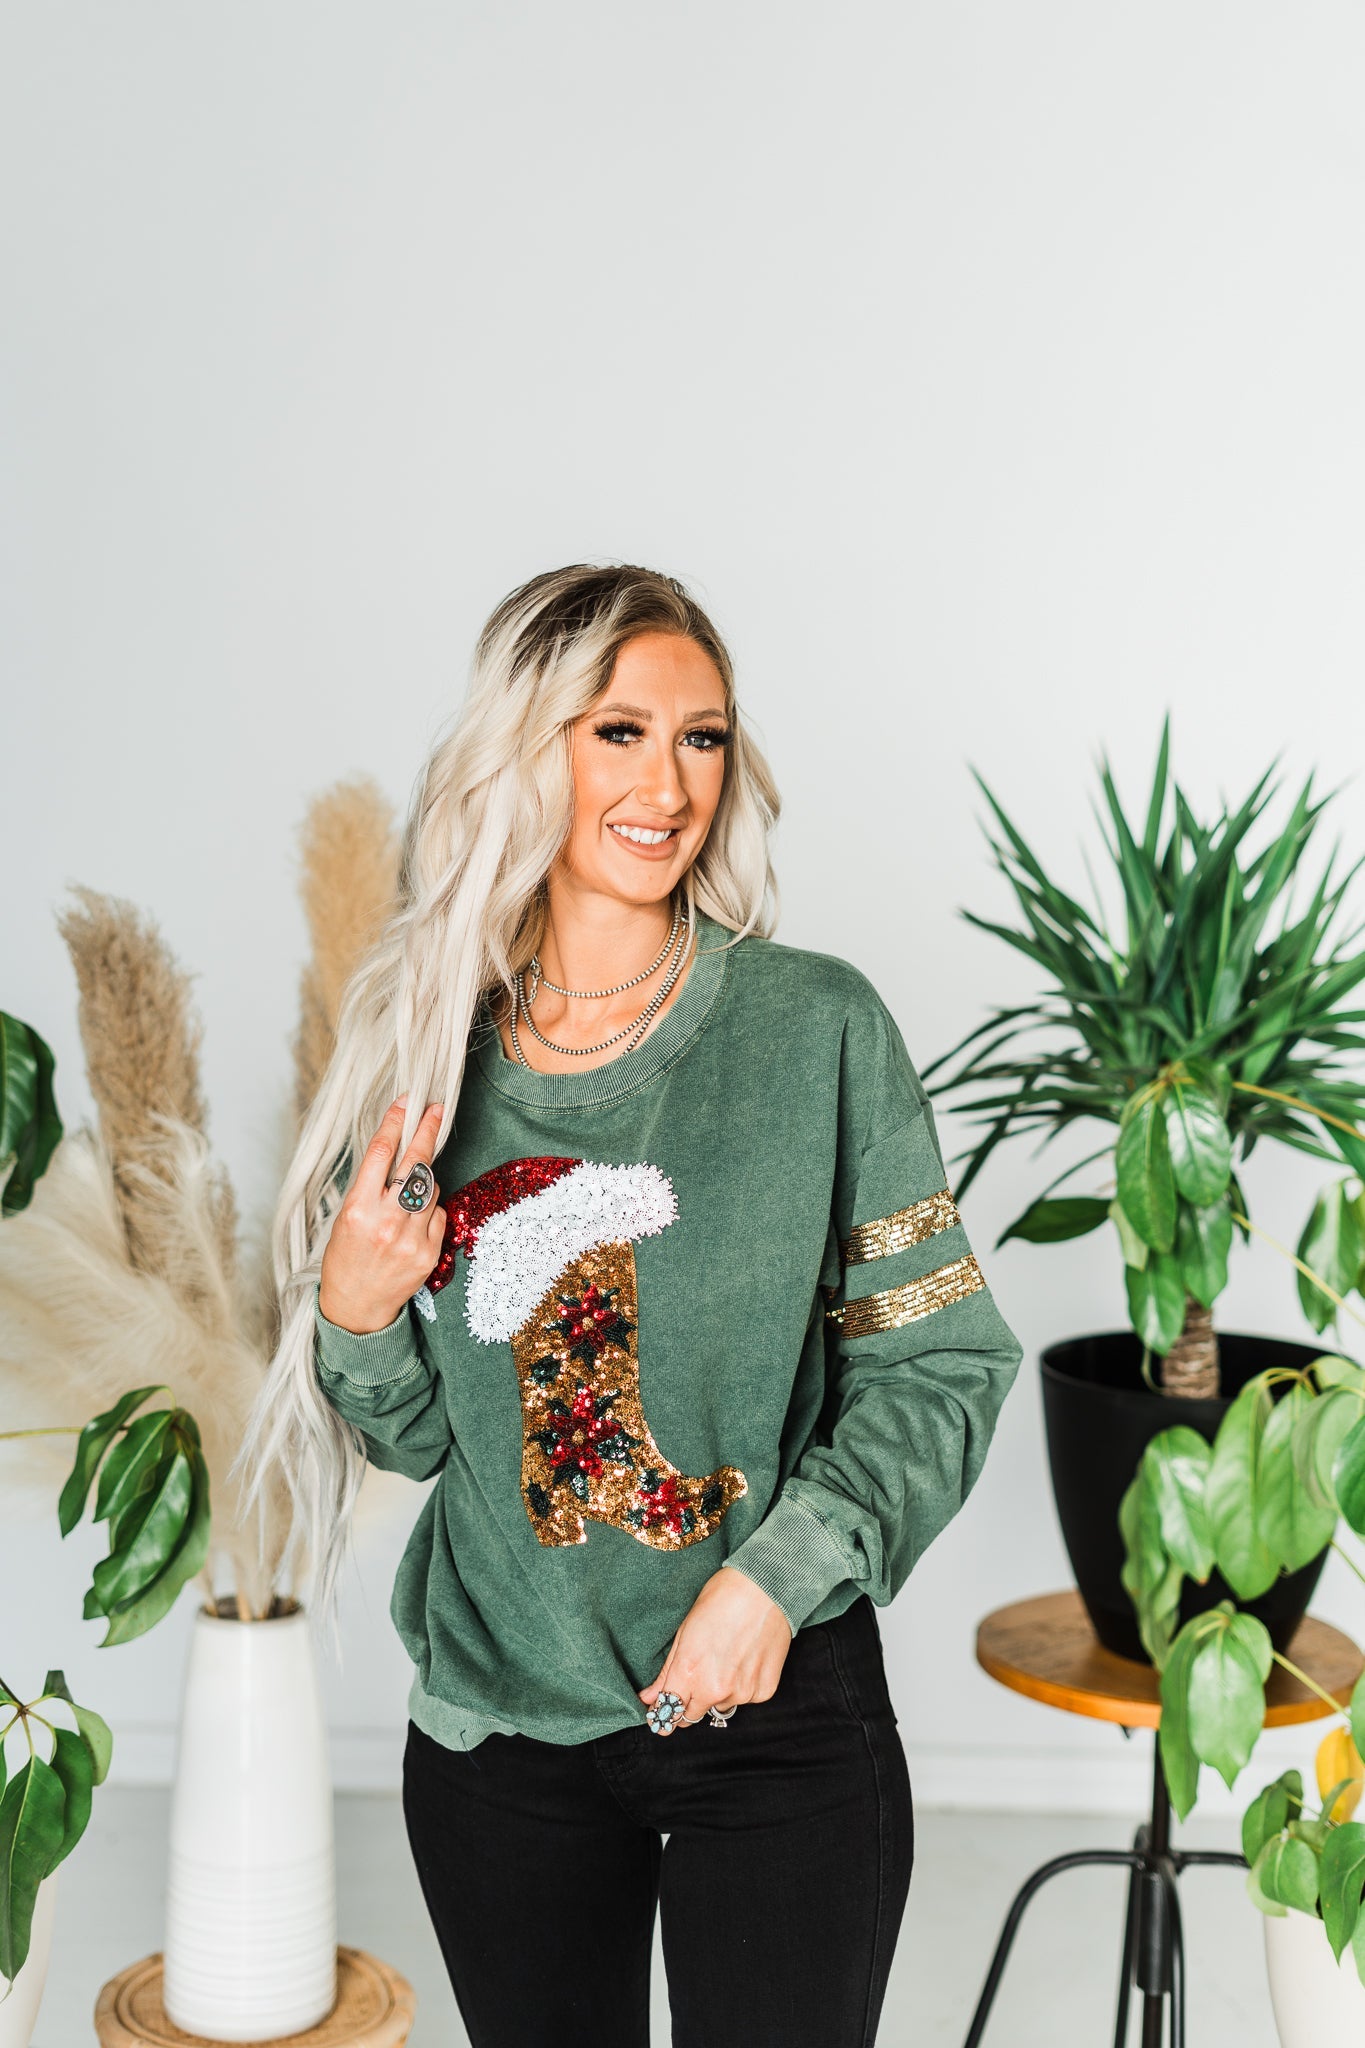 Sequin Embellished Christmas Sweater - Whiskey Skies